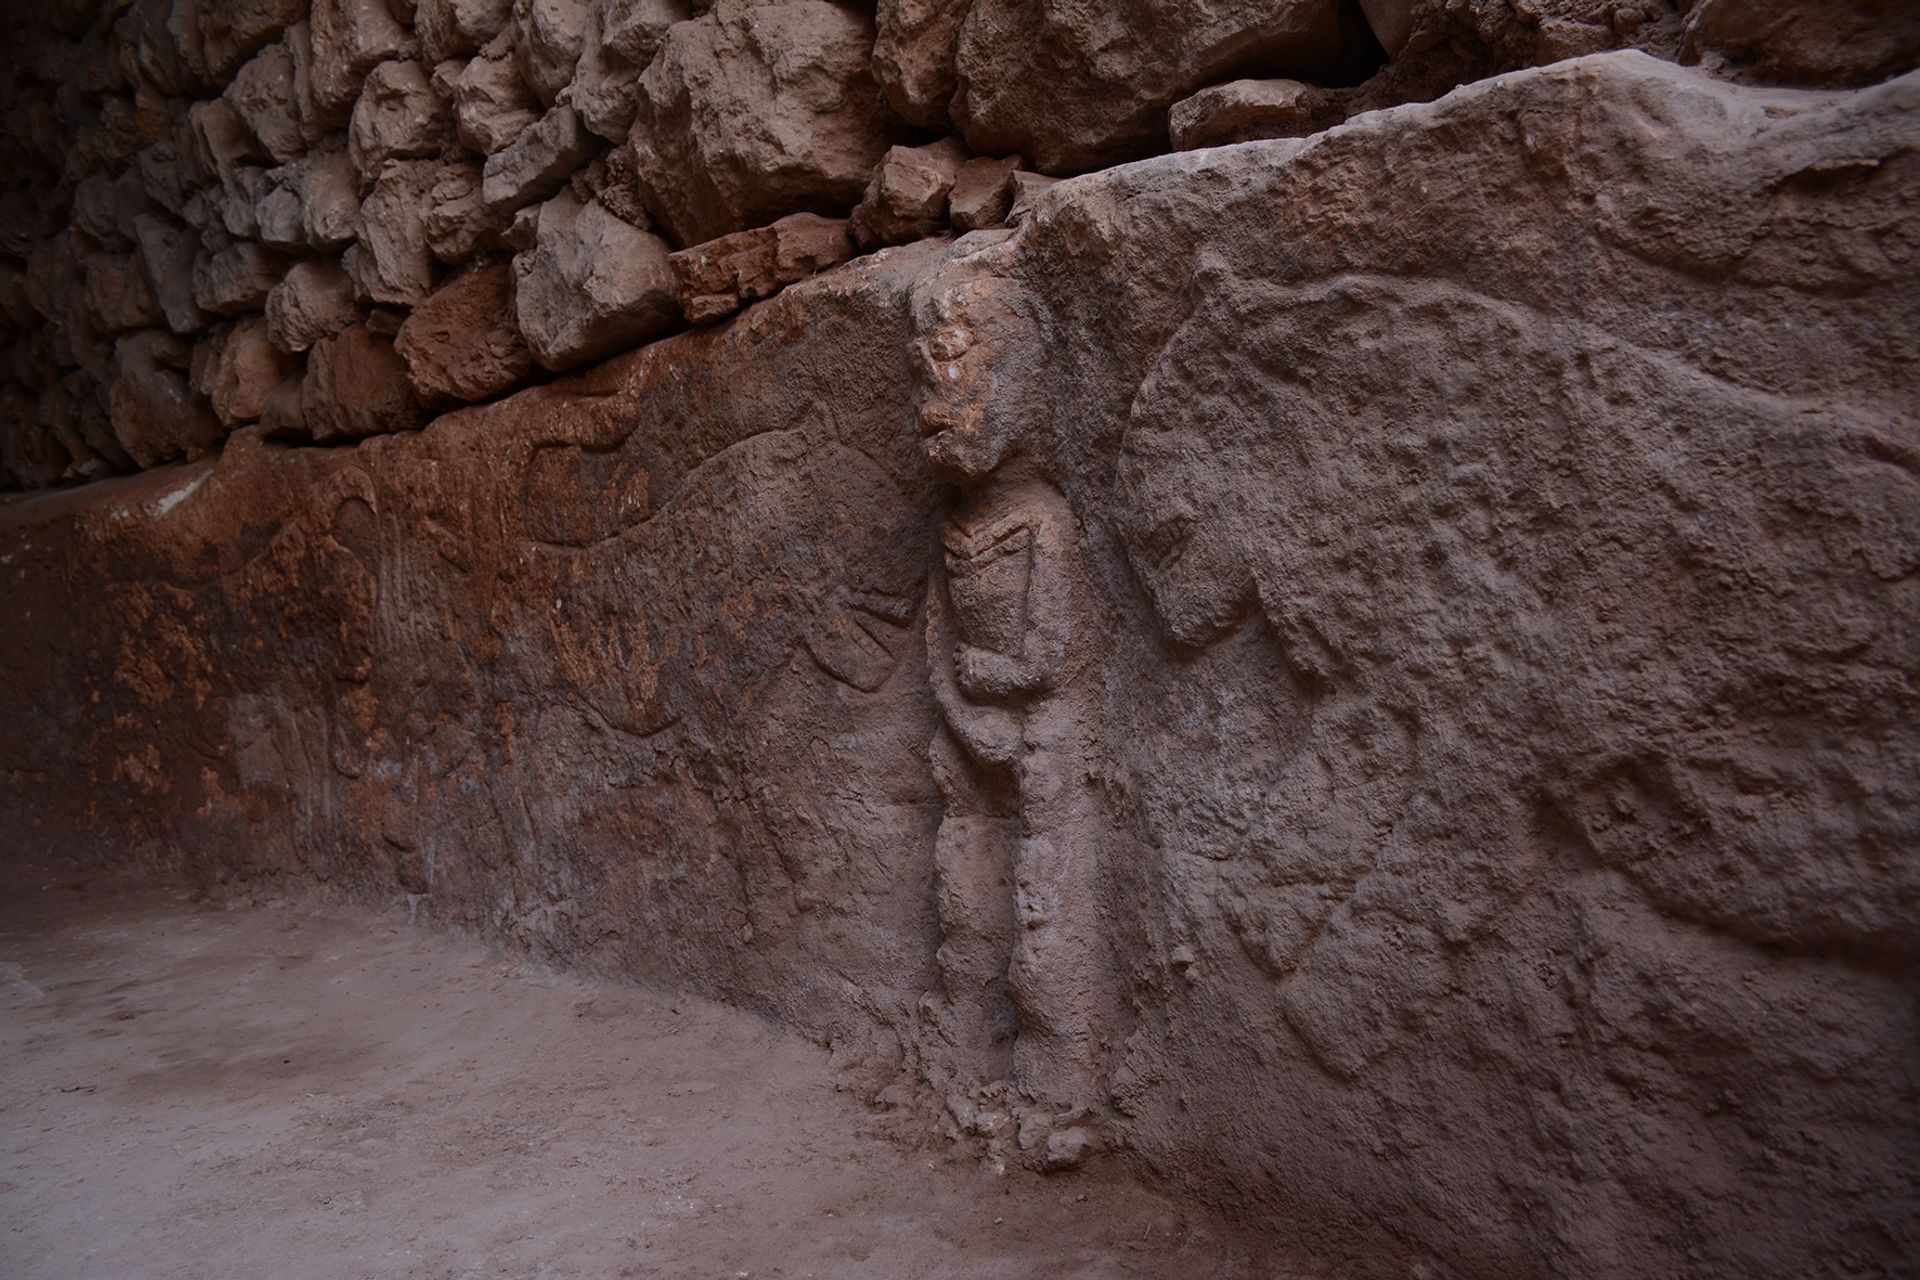 The carving of a man holding his penis surrounded by leopards is the oldest known depiction of a narrative scene, archaeologists say